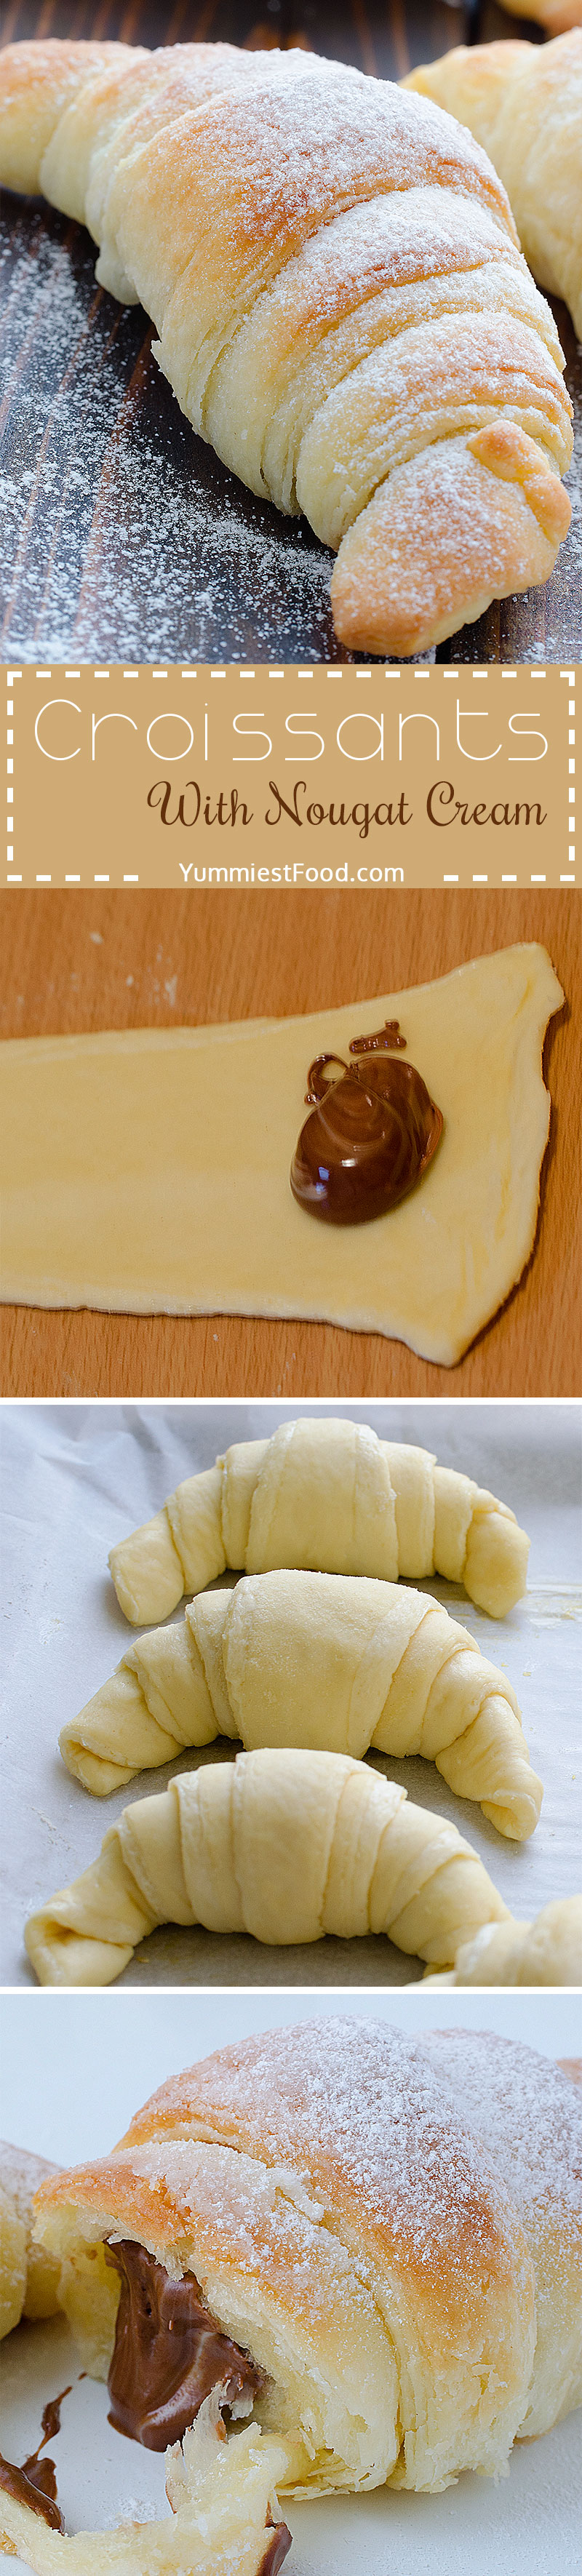 Croissants With Nougat Cream - I am sure that you haven’t taste so soft, tasty and delicious puff pastry, so you must try to make these croissants with nougat cream